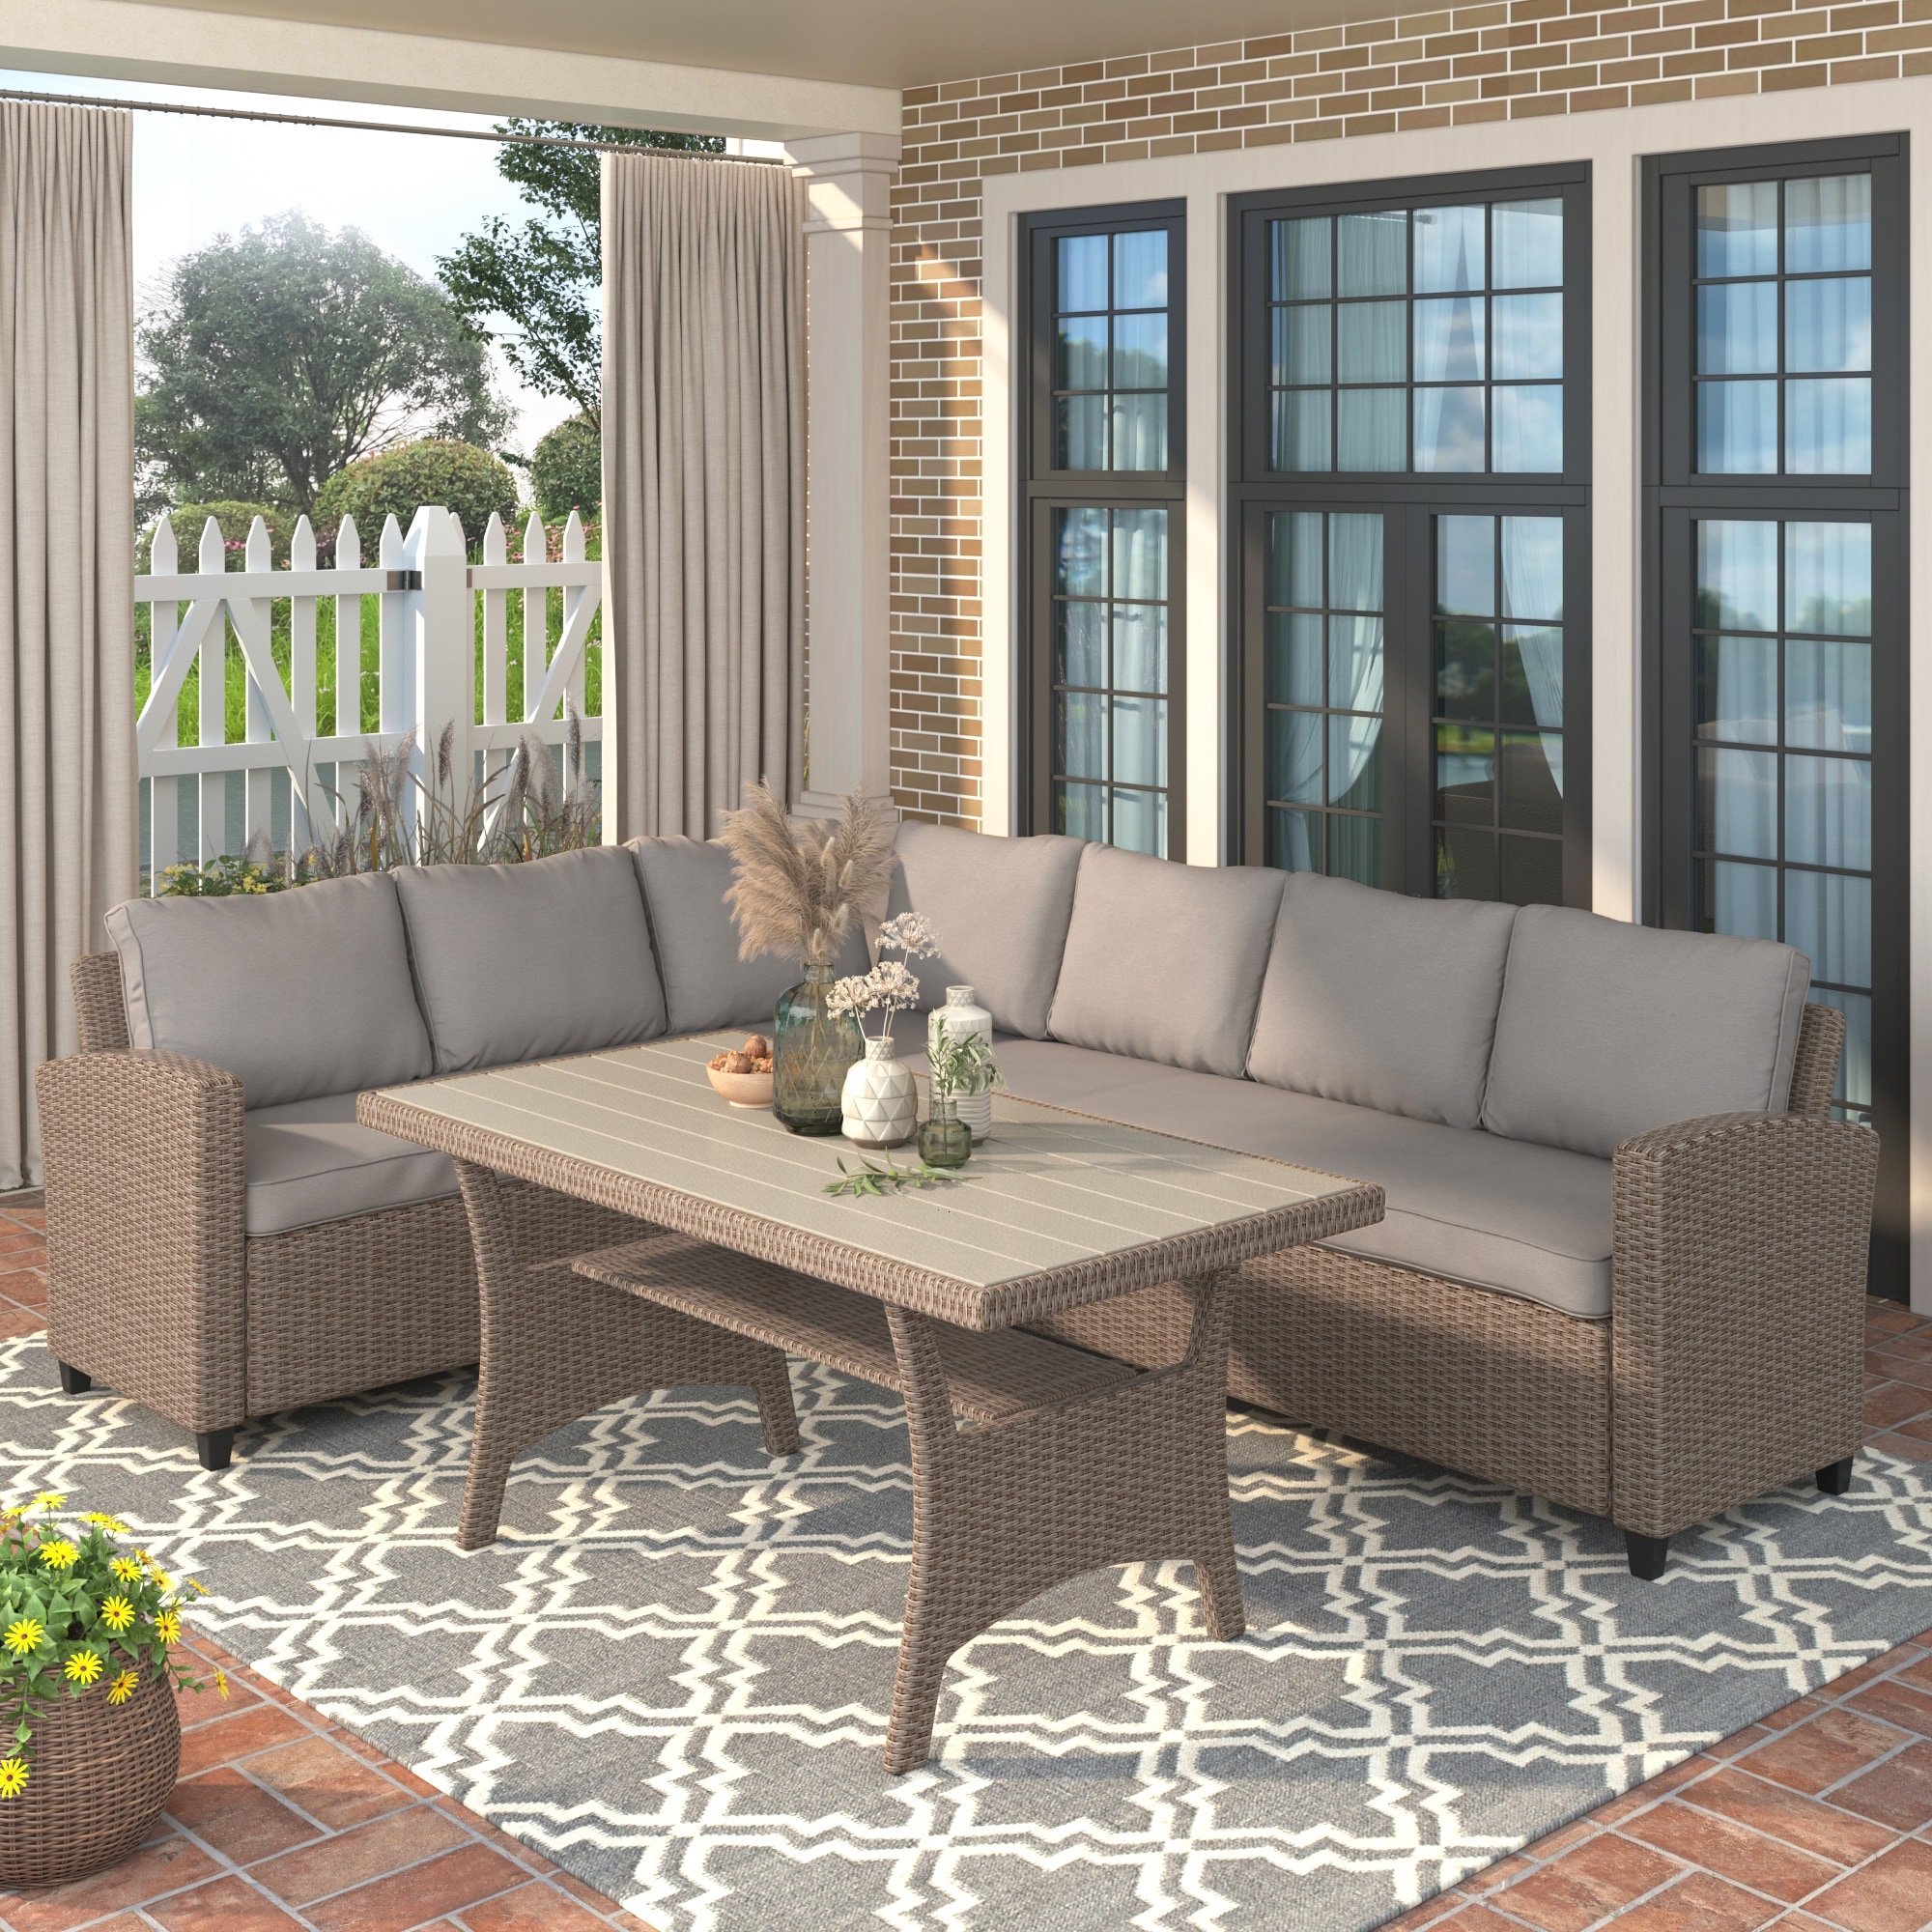 Malwee 3-piece Outdoor Patio Furniture Sets  All-weather Rattan Outdoor Sectional Sofa Withtable And Cushions